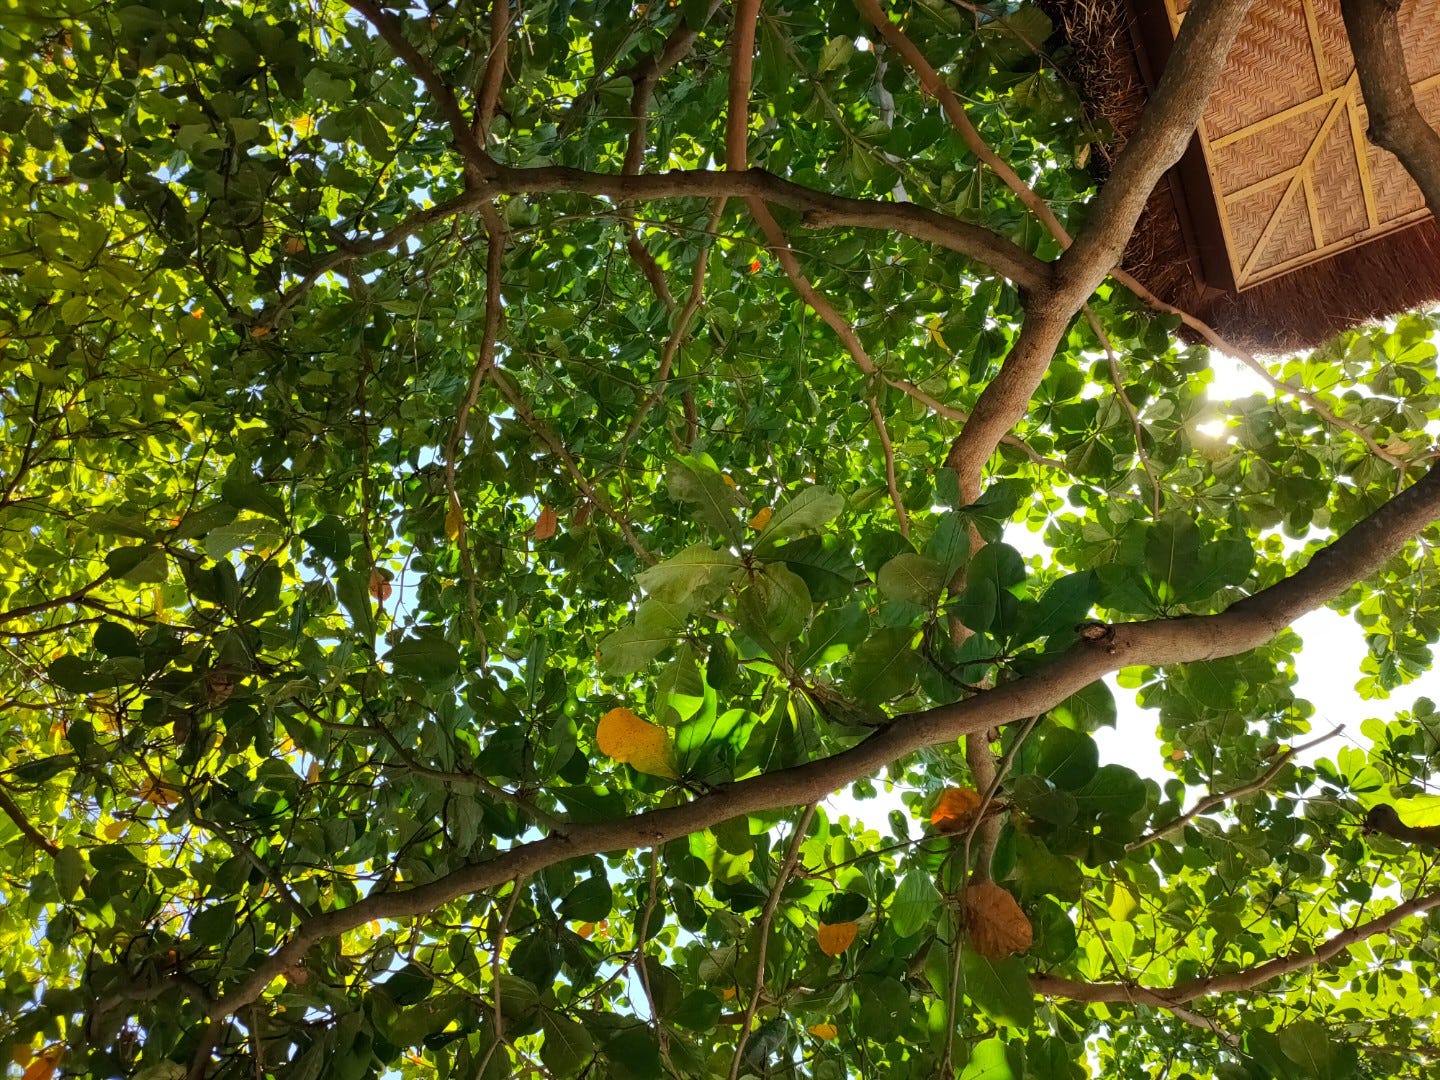 A picture of the corner of a hut and bright green foliage of a tree.